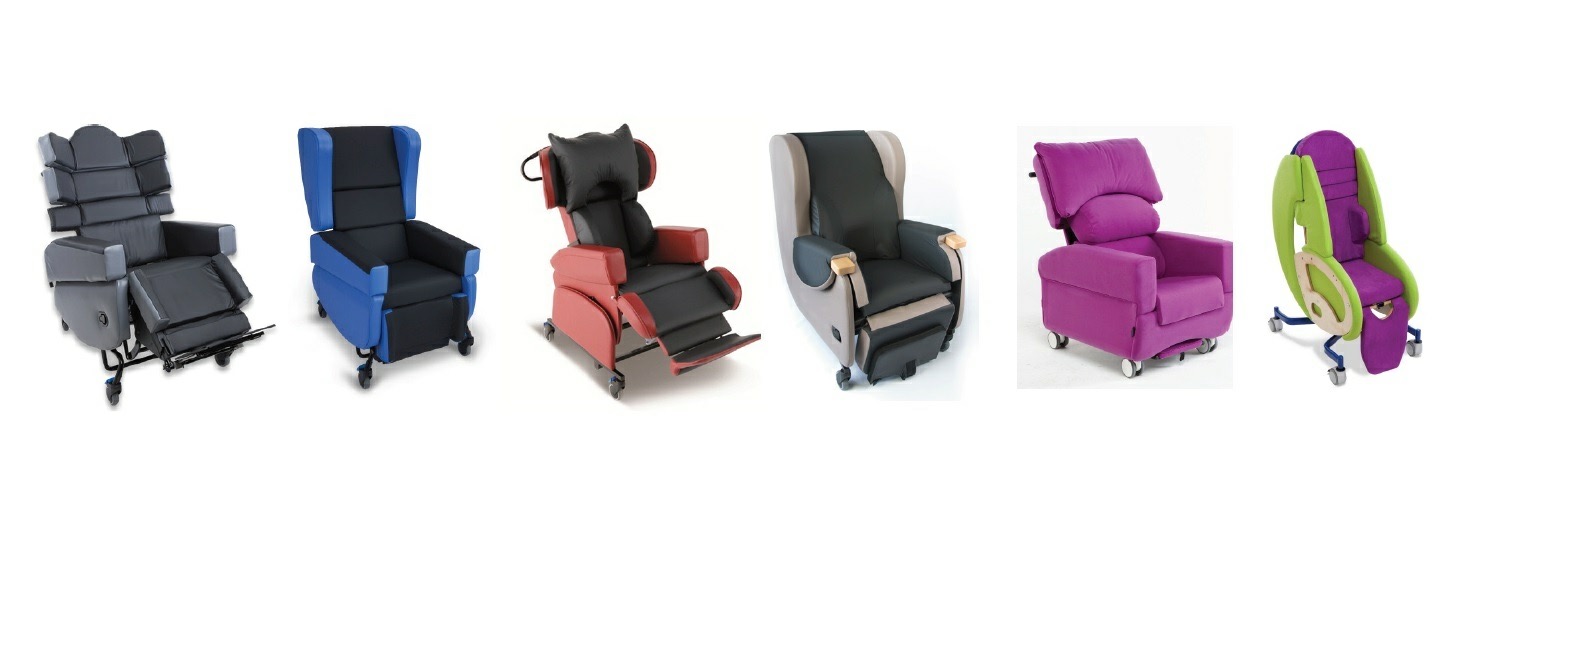 Careflex Specialist Seating range in Scotland - available to both local authorities and private clients